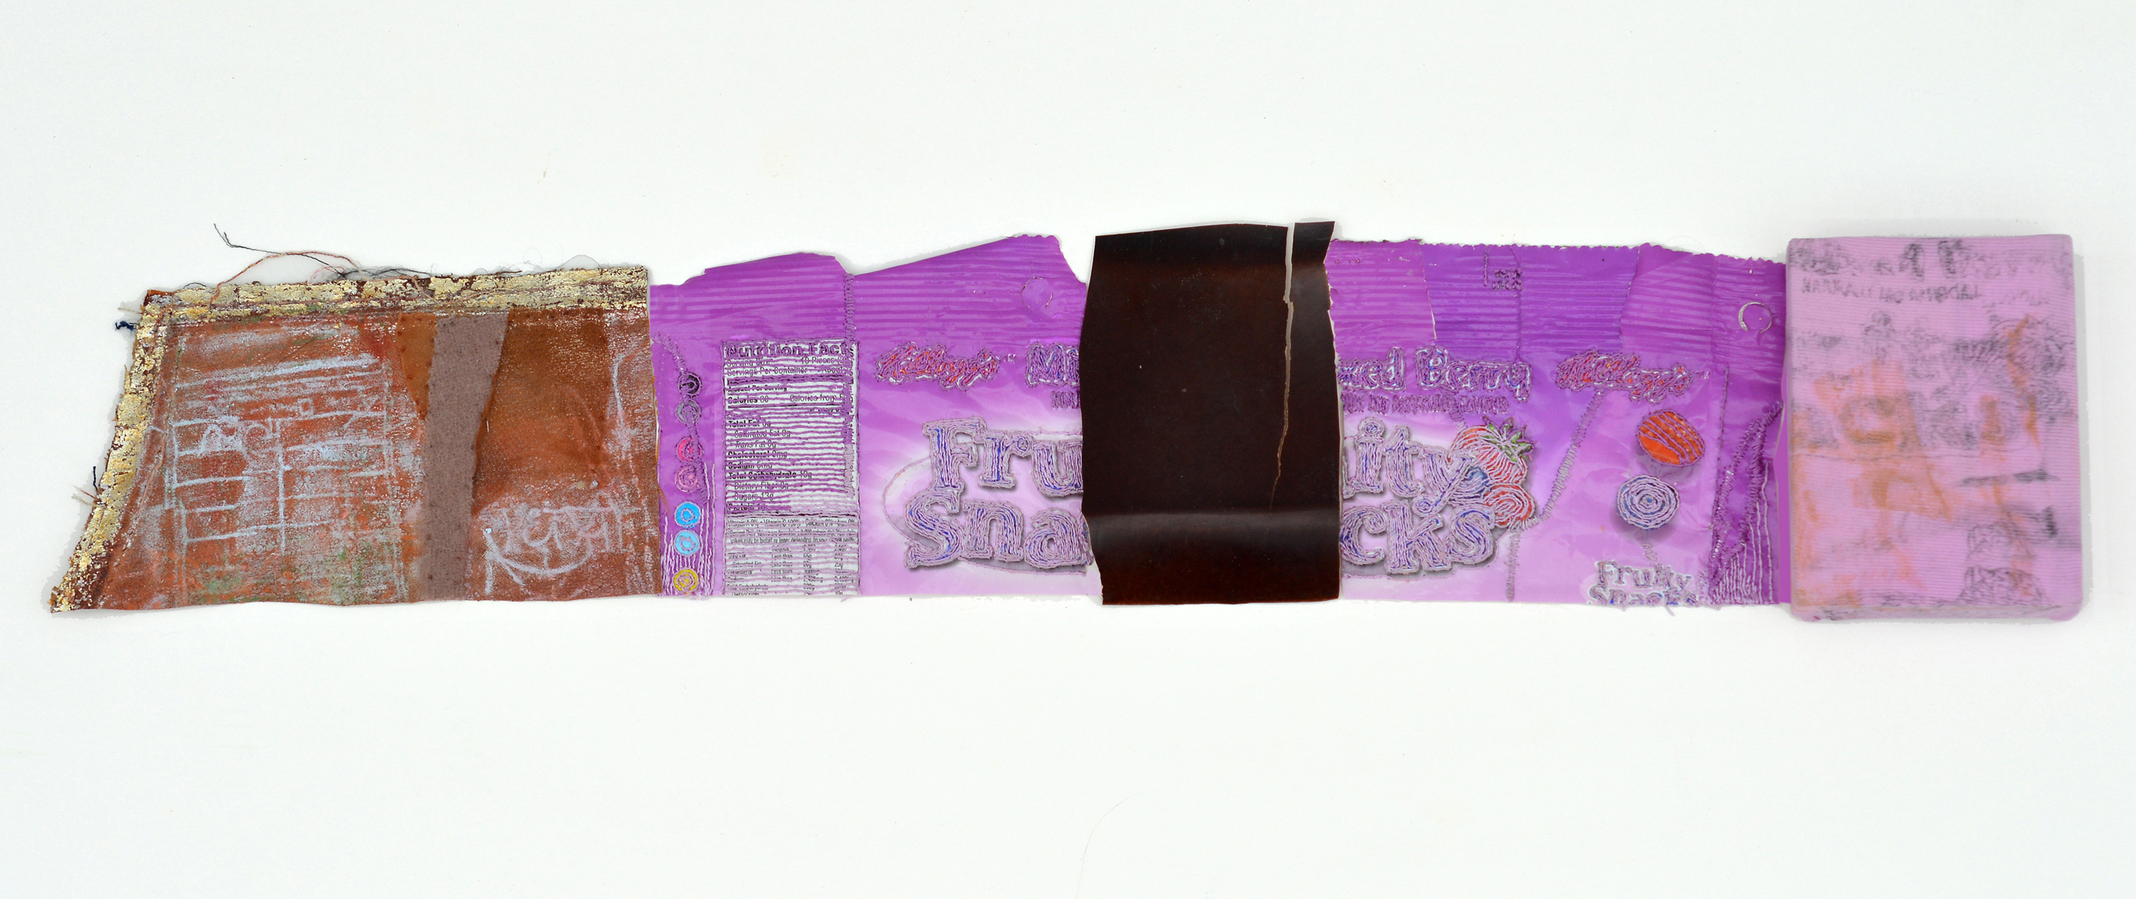 Nicola Ginzel  Archive/ Selected Flatwork  graphite frottage on bathing suit remnant, pastel frottage on leather purse remnant, wrapper embroidered by hand, veneer remnant